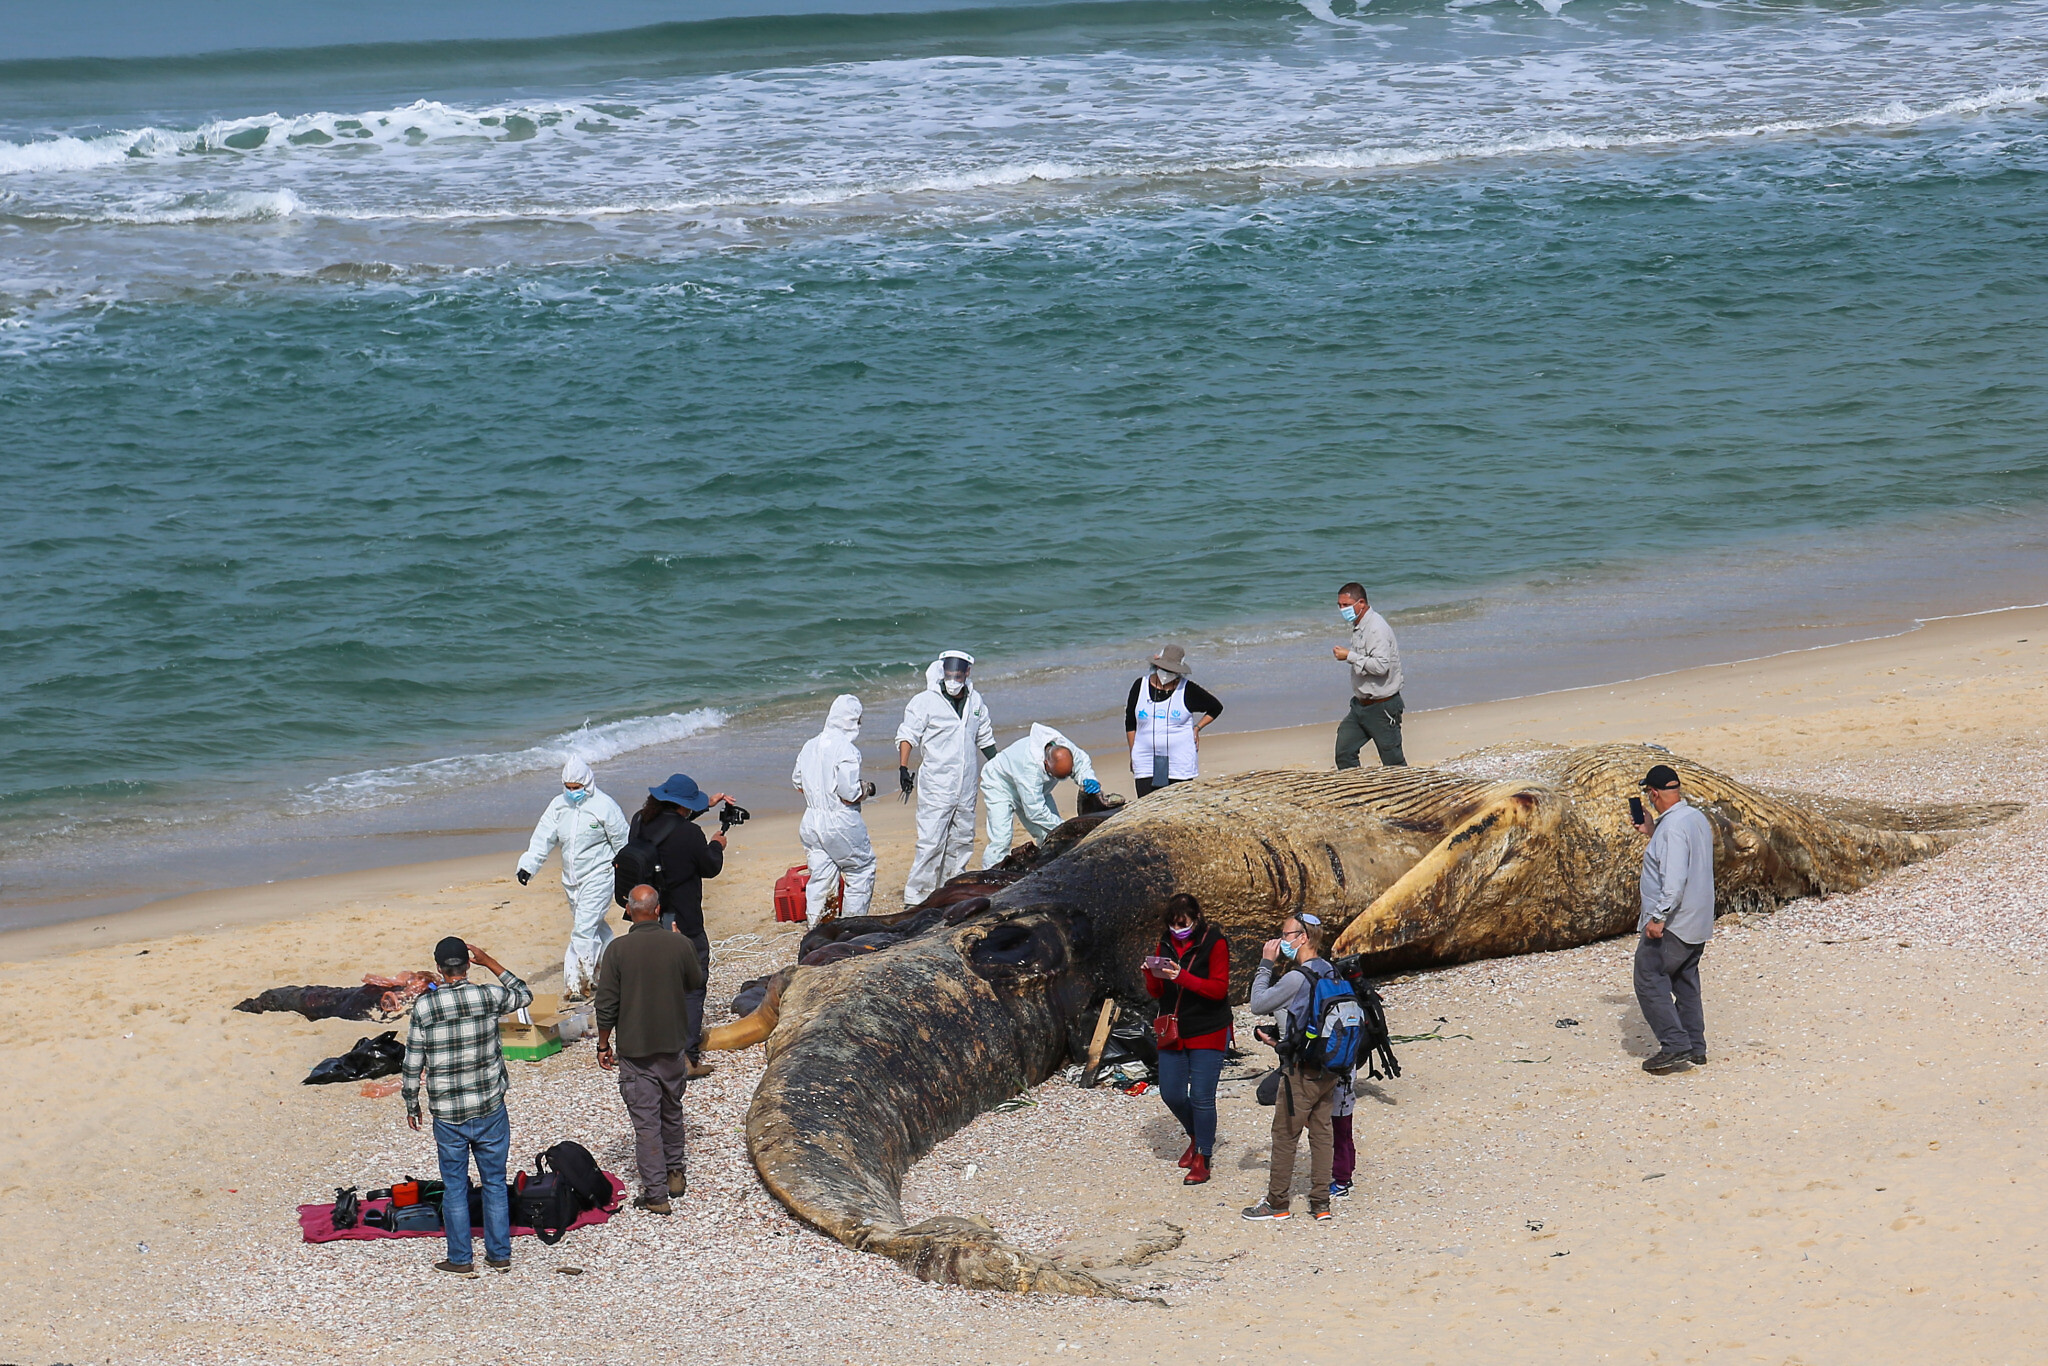 Marine veterinarians take samples from a 17-meter long fin whale washed ashore on the Nitzanim beach, near the city of Ashkelon, February 21, 2021. (Flash90)